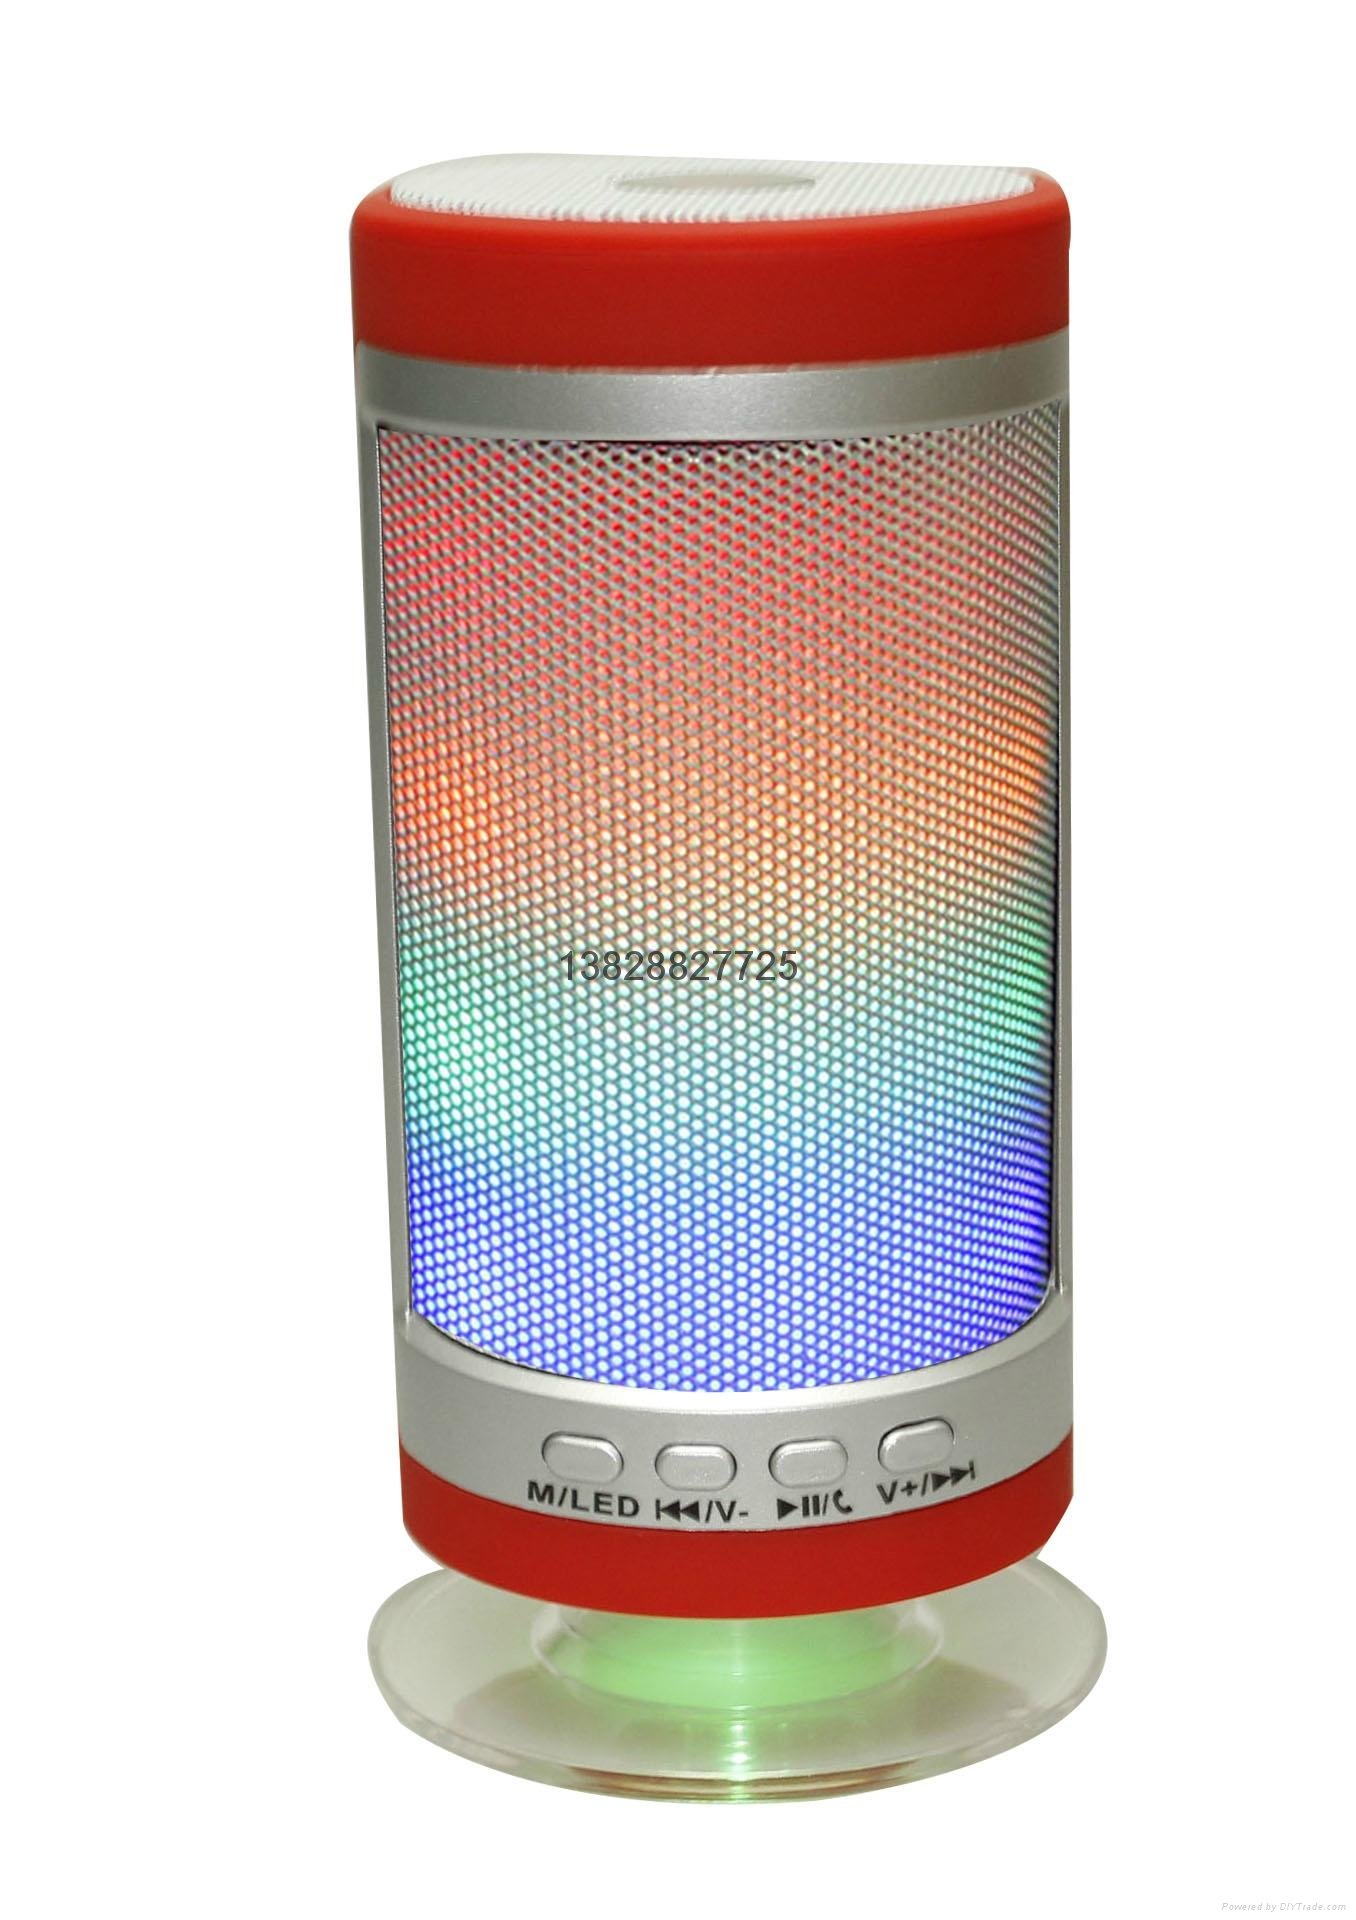 New arrival shenzhen 2015 bluetooth speaker with led light 4